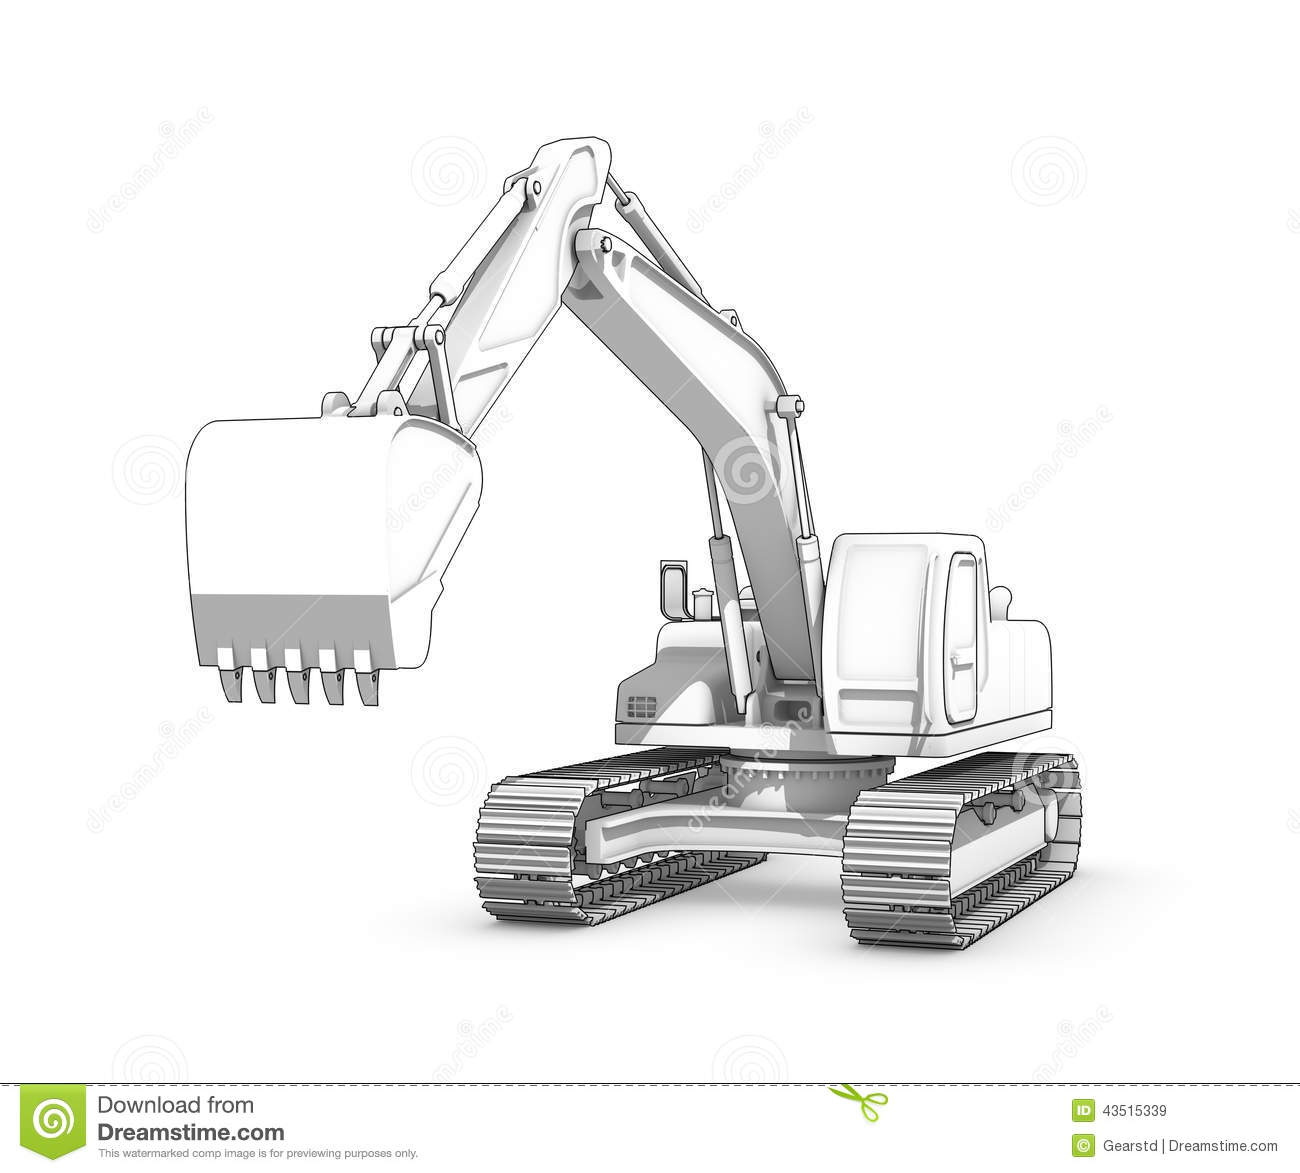 Three Dimensional Illustration Of Black And White Sketch Of Excavator